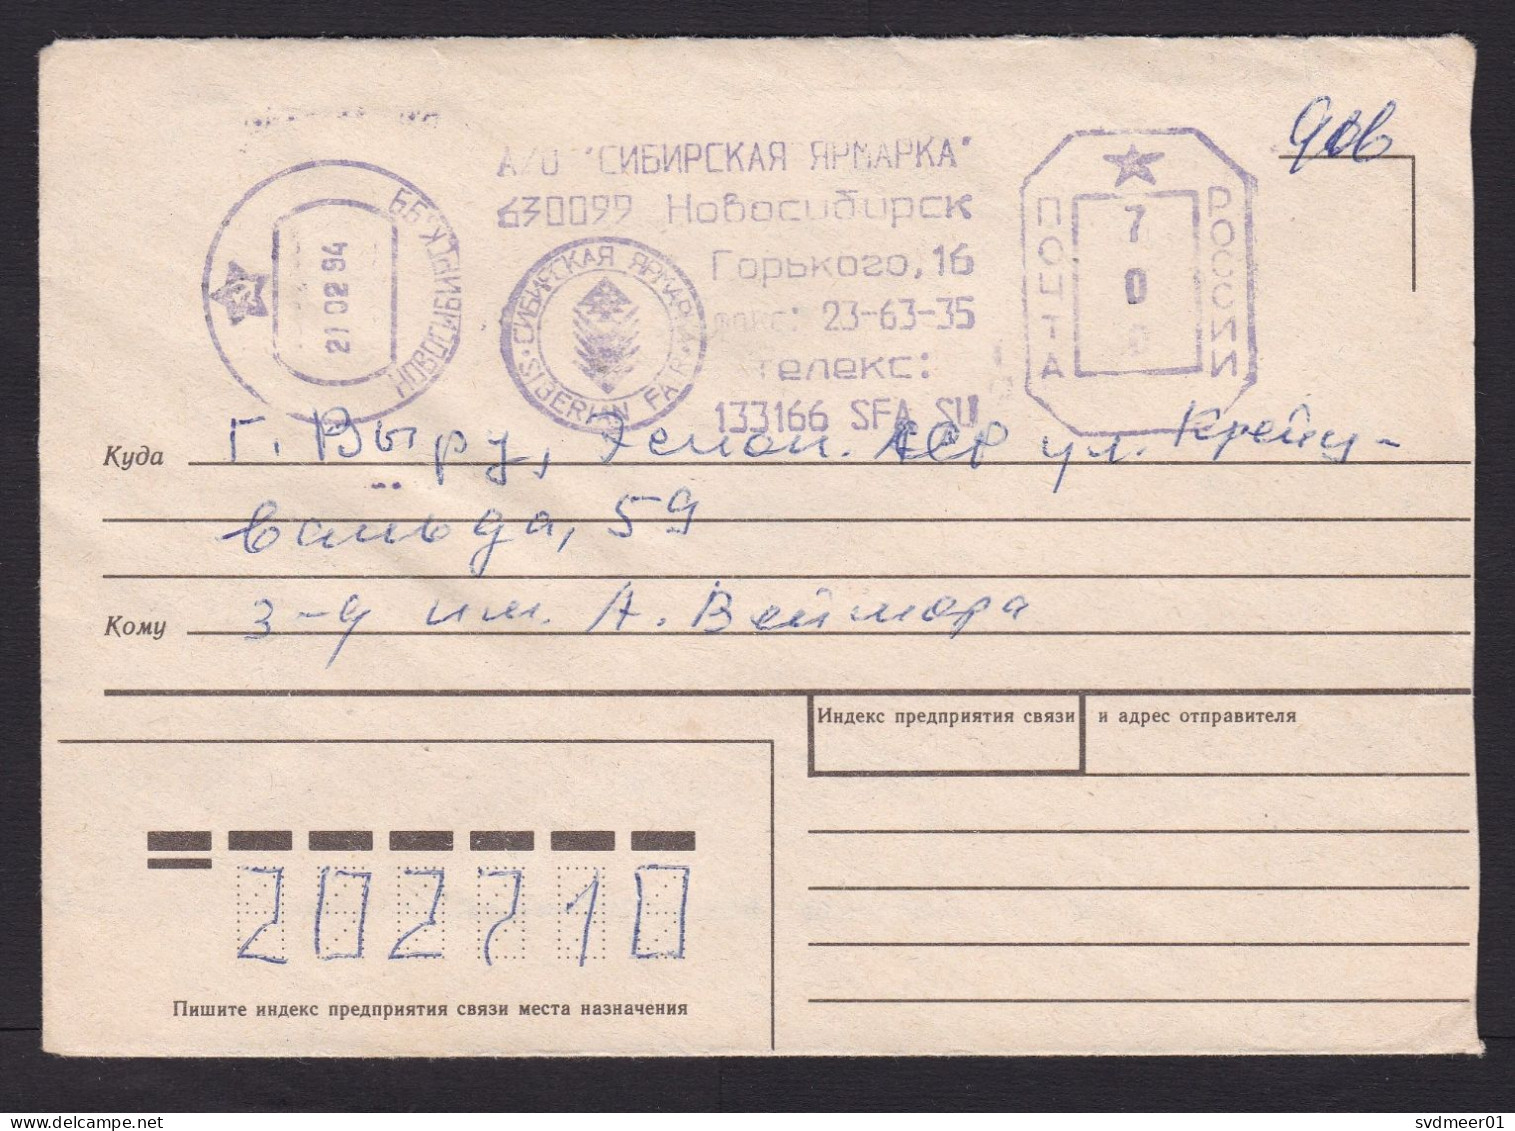 Russia: 11x cover, 1993-1994, meter cancel, partly use of old USSR ones, inflation, post-Soviet chaos (minor damage)